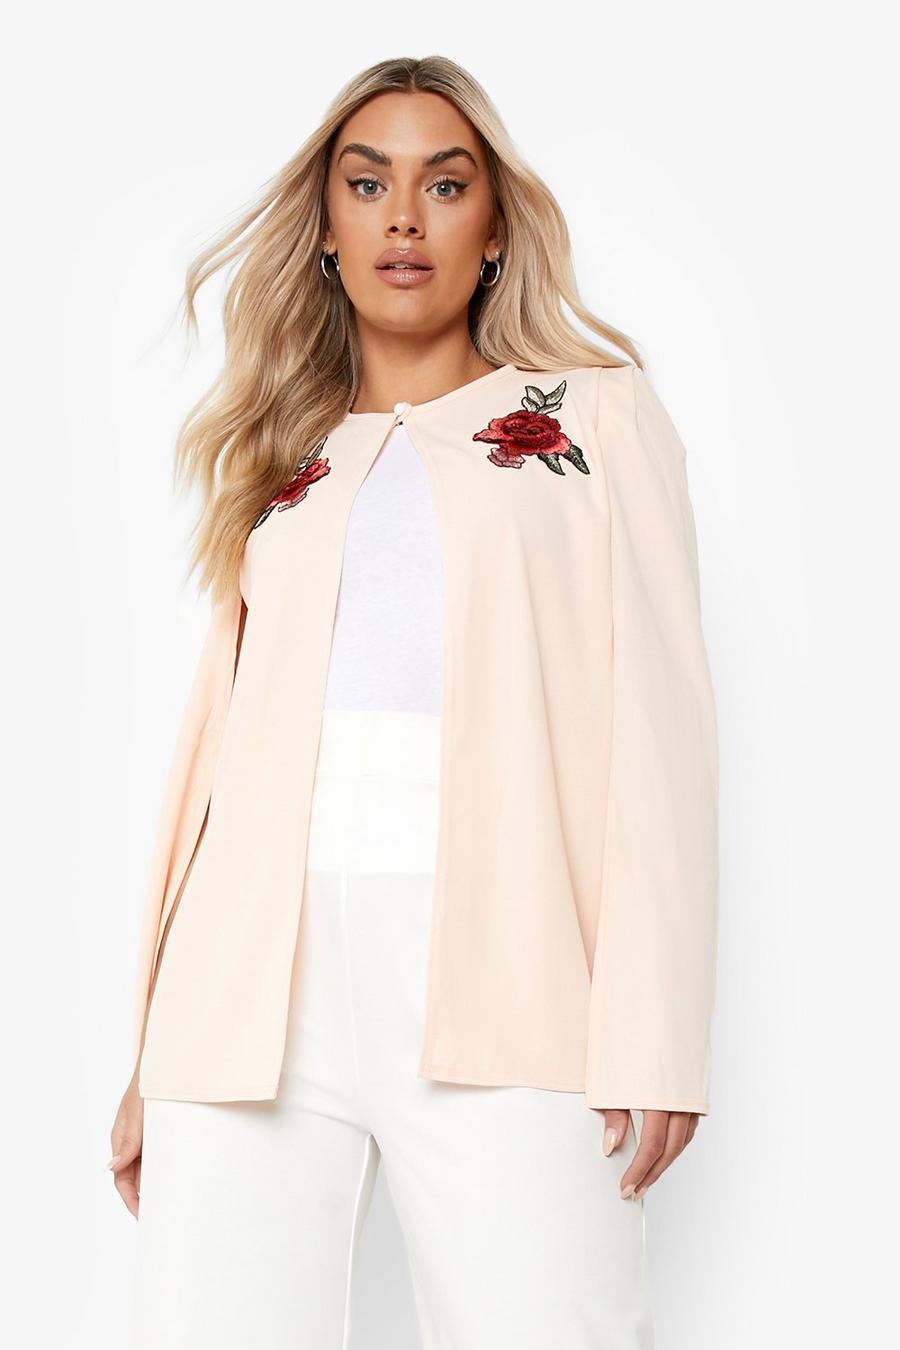 Grande taille - Veste style cape avec broderie roses, Nude image number 1